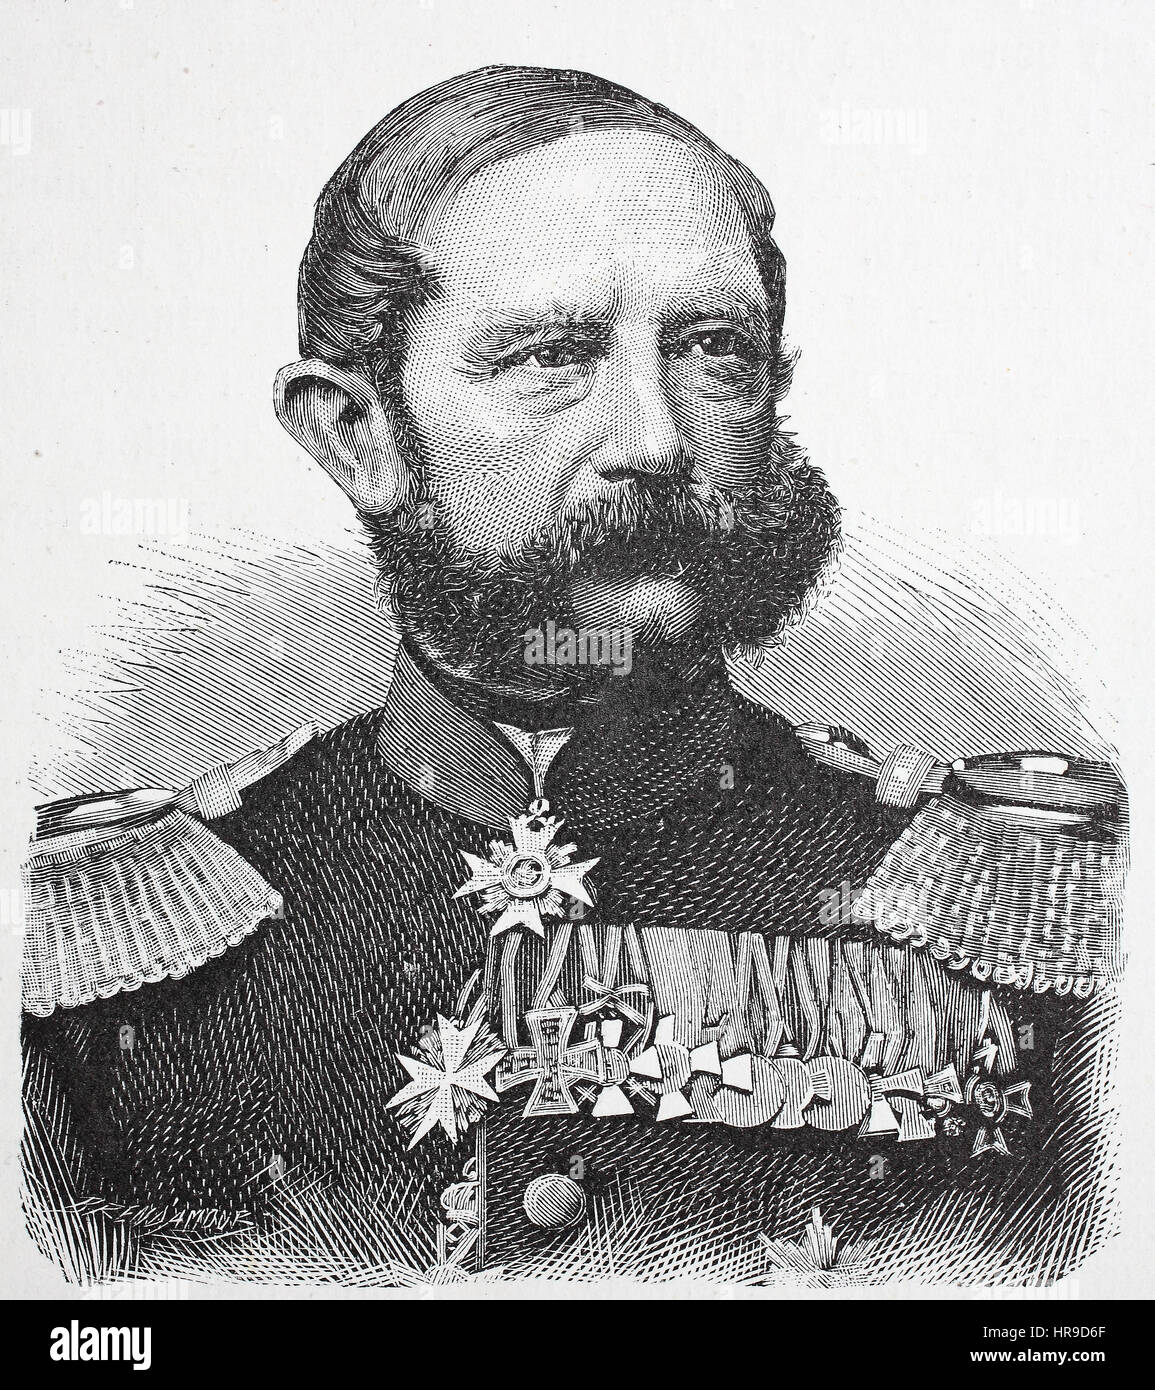 Hugo Karl Ernst Freiherr von Kottwitz, 1815 - 1897, Was a Prussian general of the infantry, Situation from the time of The Franco-Prussian War or Franco-German War,  Deutsch-Franzoesischer Krieg, 1870-1871, Reproduction of an original woodcut from the year 1885, digital improved Stock Photo